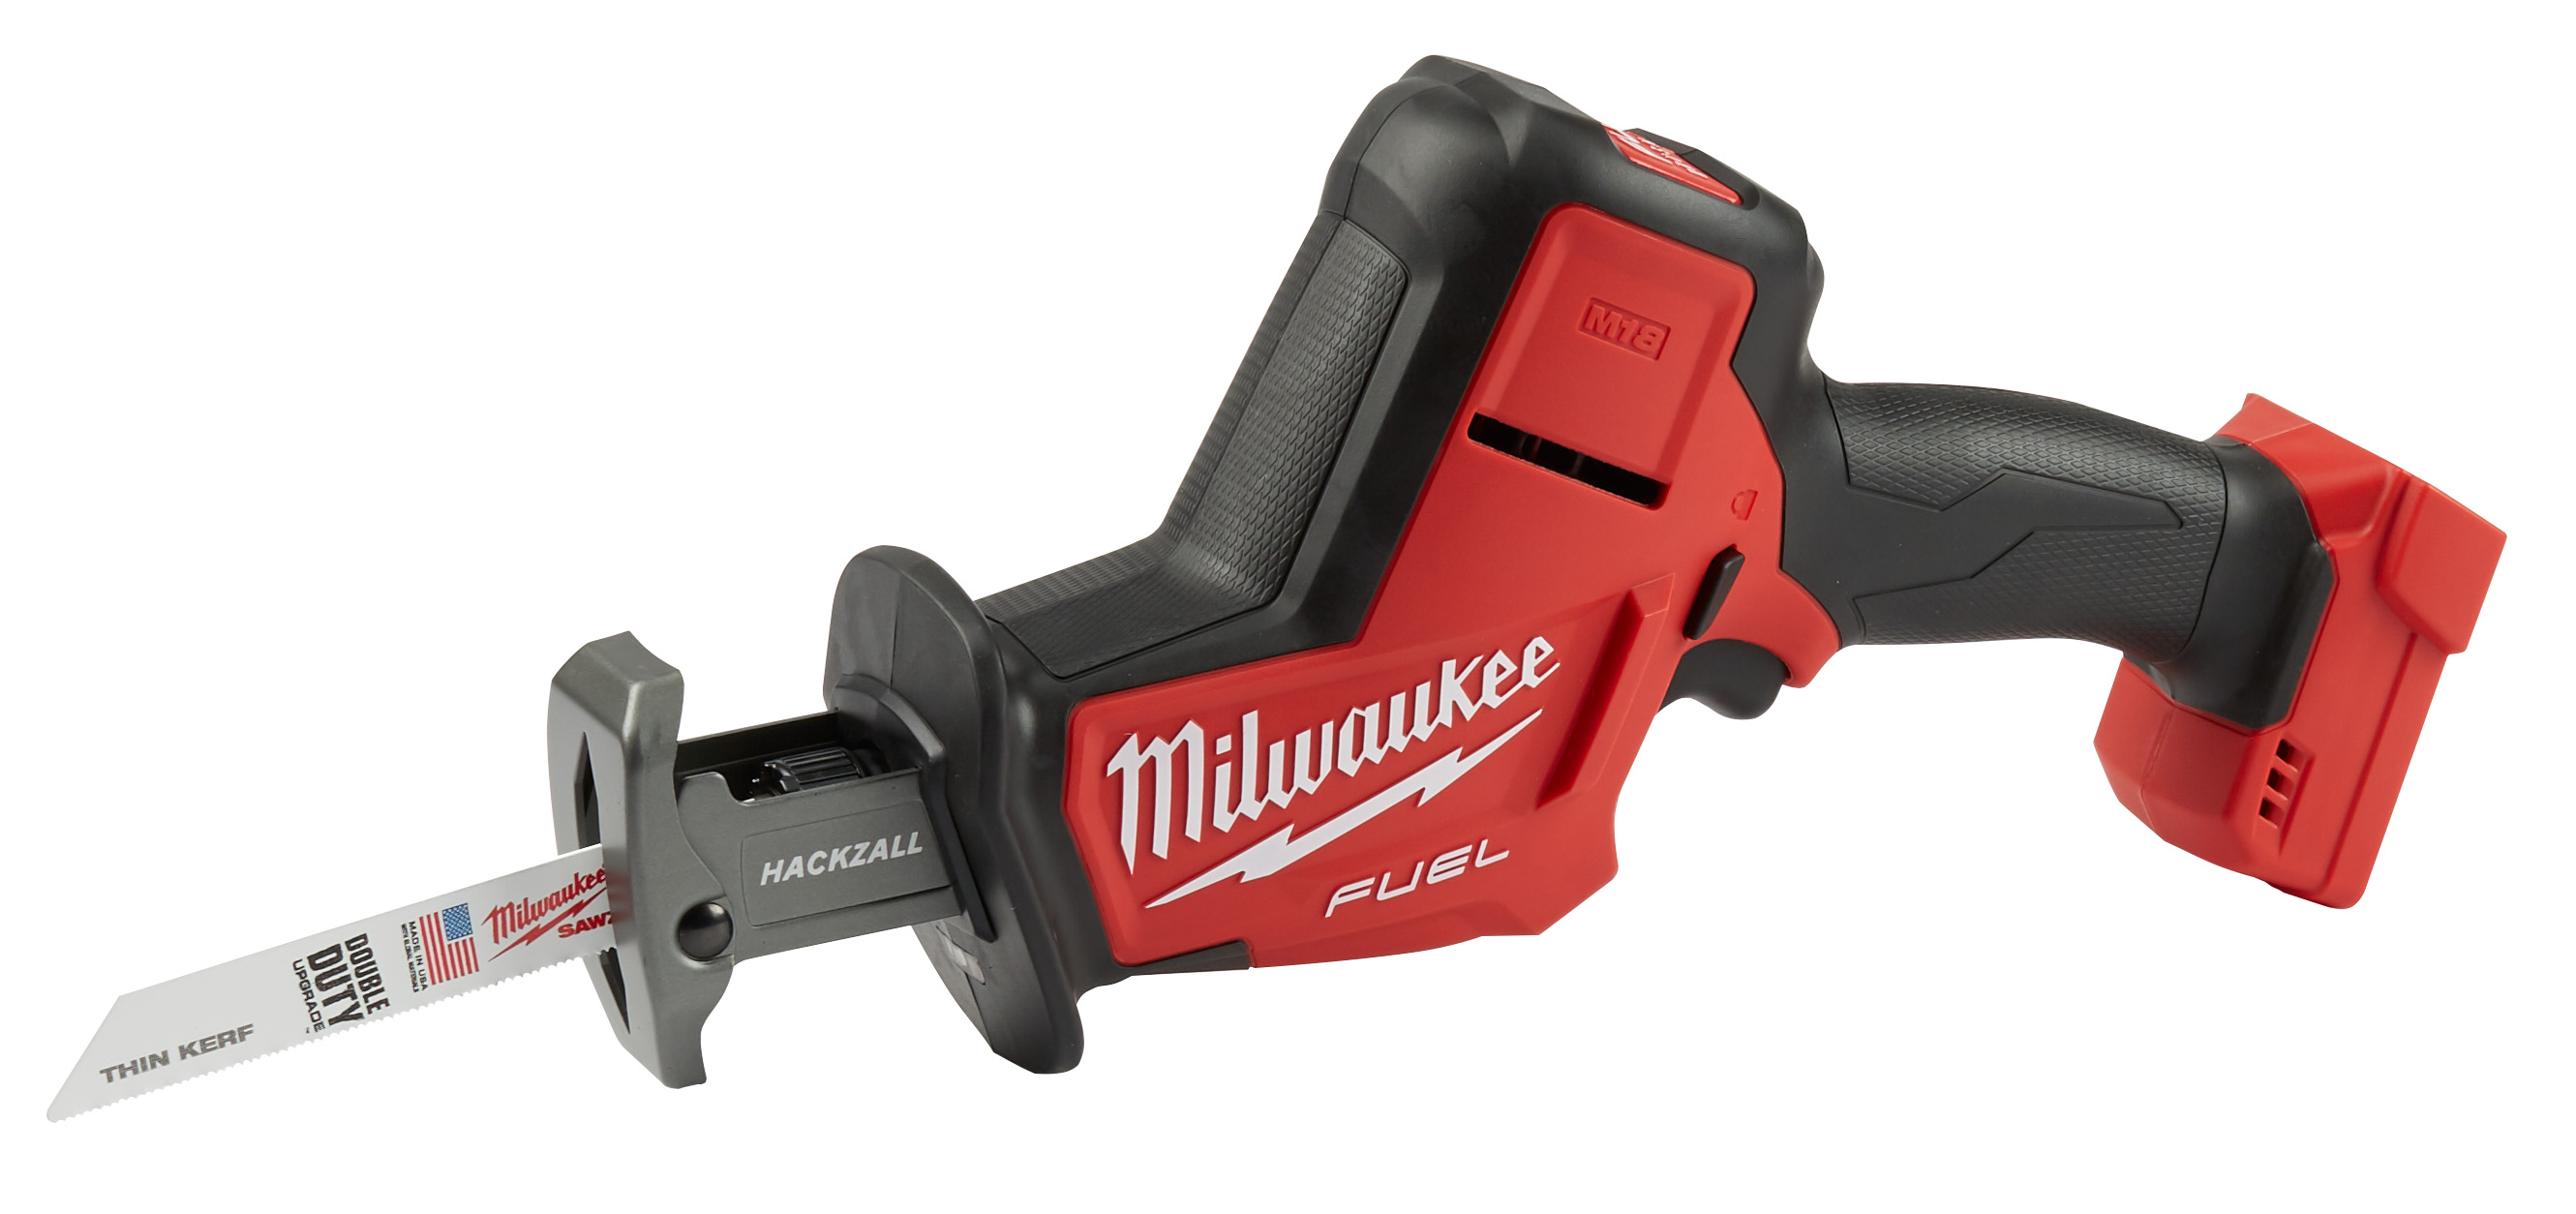 The Milwaukee 2719 M18 FUEL™ HACKZALL® is the fastest cutting and most powerful one-handed reciprocating saw. Utilizing a POWERSTATE brushless motor and a best in class 7/8 in. stroke length, the M18 FUEL™ HACKZALL® cuts up to 50% faster than competitors. The compact, one-handed design provides superior control and the ability to make cuts in tight spaces. The dual gear counter balance mechanism provides up to 4x lower vibration than traditional reciprocating saws, resulting in faster cut-starts in metal and reduced user fatigue. REDLINK PLUS intelligence ensures optimized performance and protects your investment from overload, overheating, and over-discharge. The M18 REDLITHIUM XC5.0 battery pack provides more work per charge and more work over the life of the pack than competitive batteries. A rubber seal and weep holes provide superior protection against water and debris.